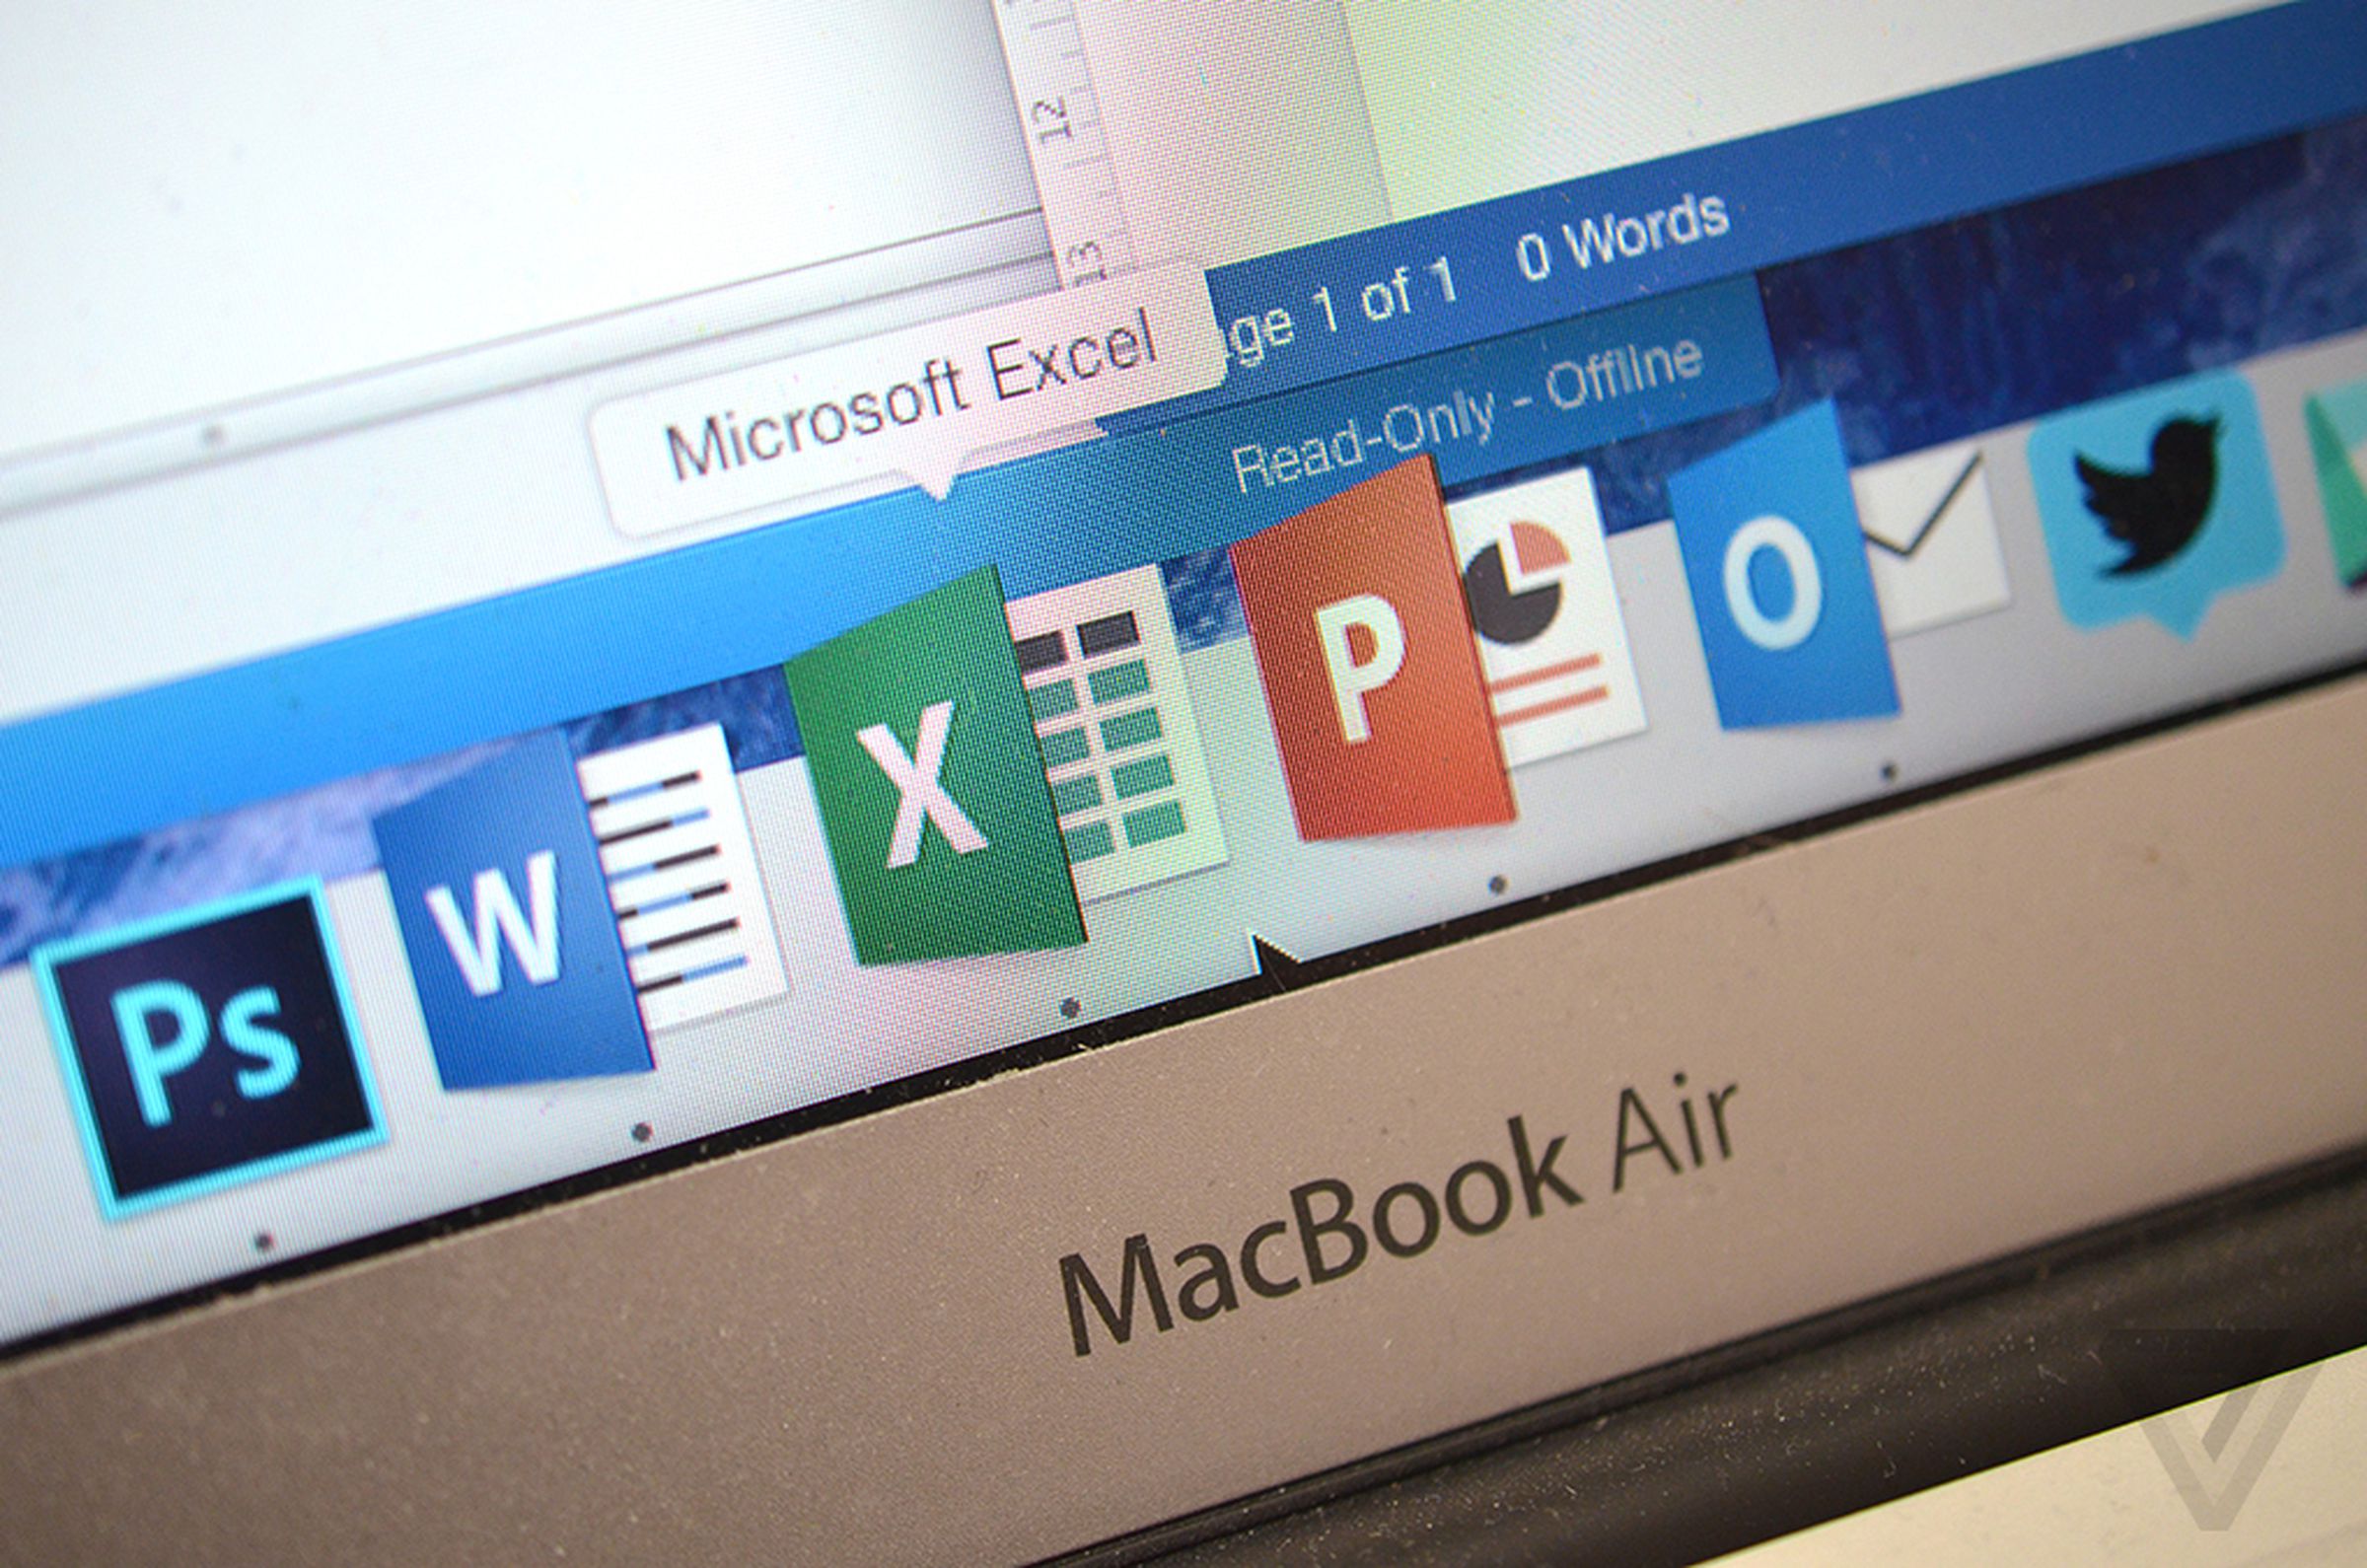 Office 2016 for Mac preview photos